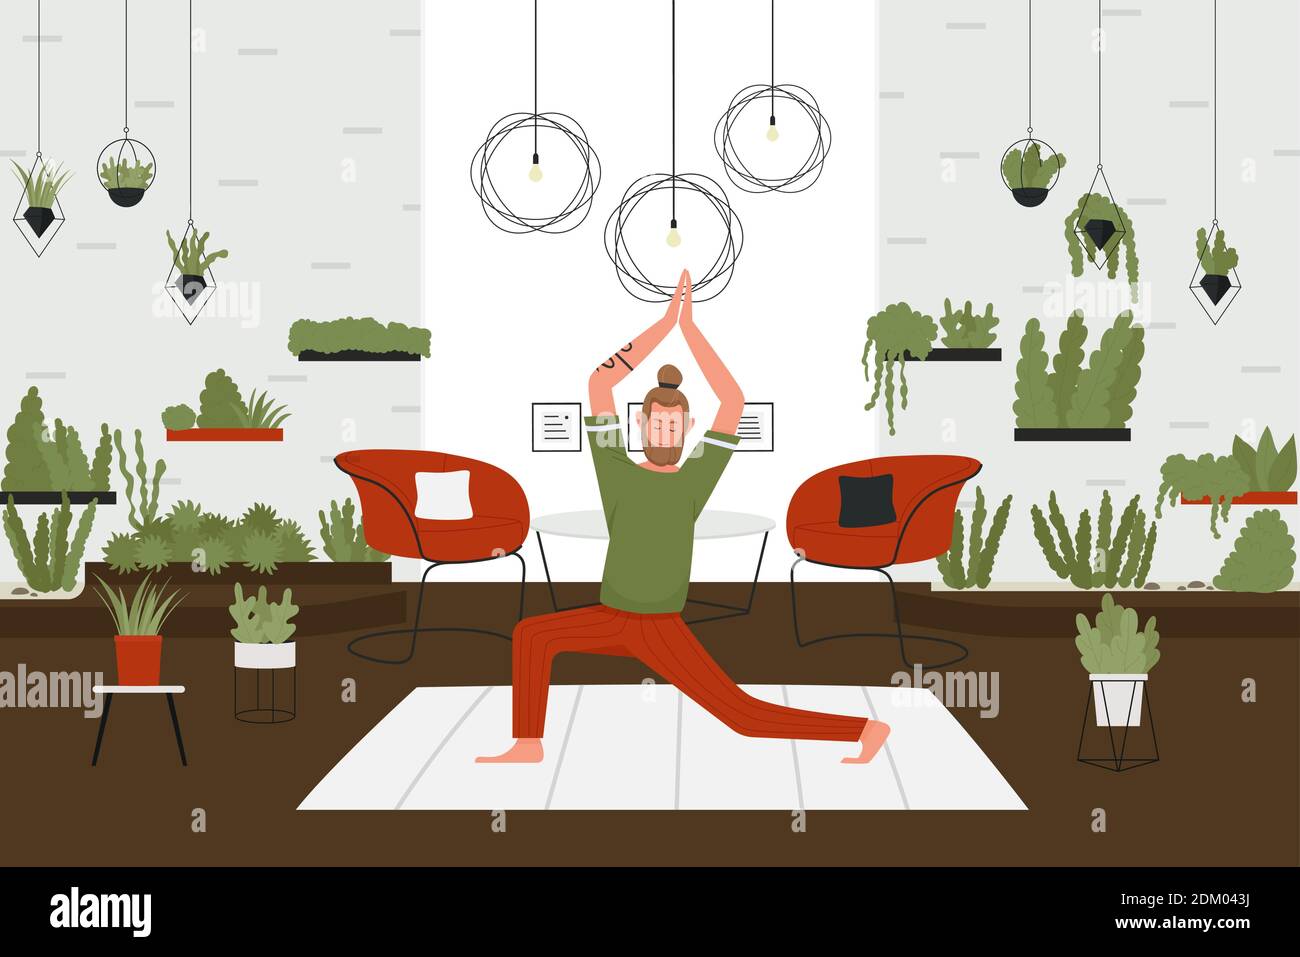 Yoga activity at home vector illustration. Cartoon active man character with beard doing yoga pranayama exercise, meditating, sport fitness mindfulness practice in home living room interior background Stock Vector